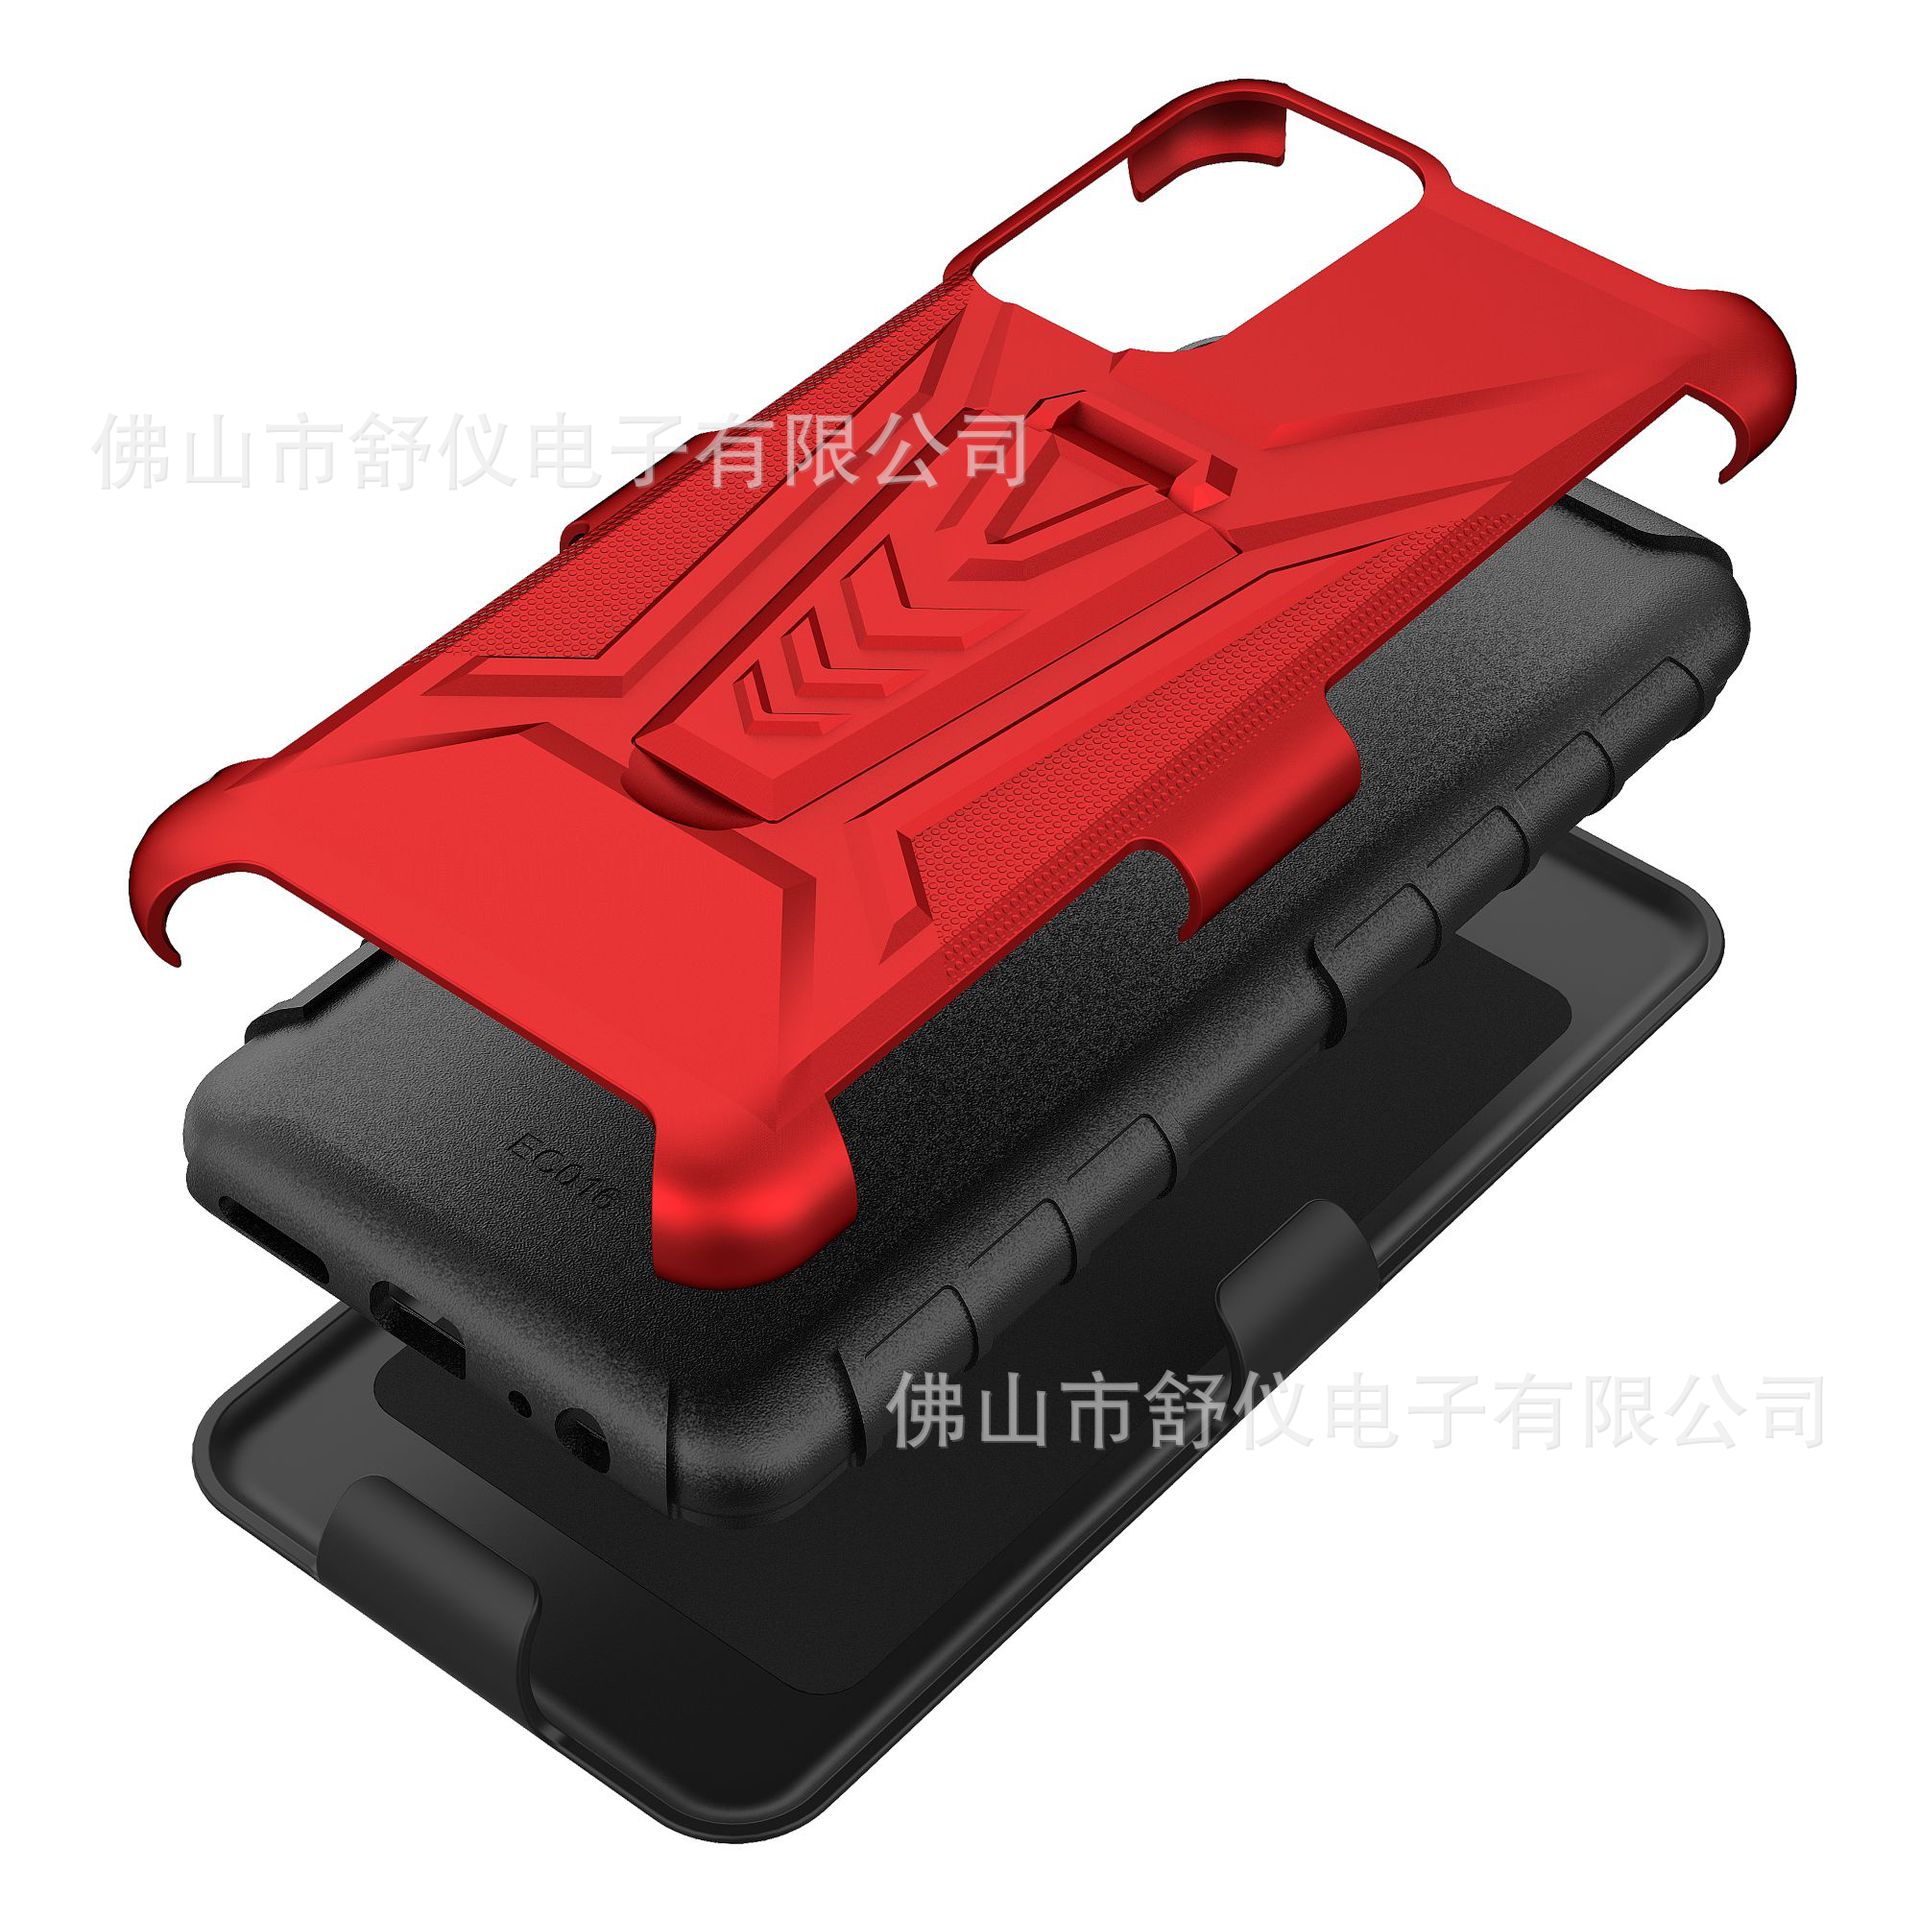 Applicable to Tcl Stylus 5G Samsung A03s A13 A53 Three-in-One Slide Bushing Case Back Splint Mobile Phone Case